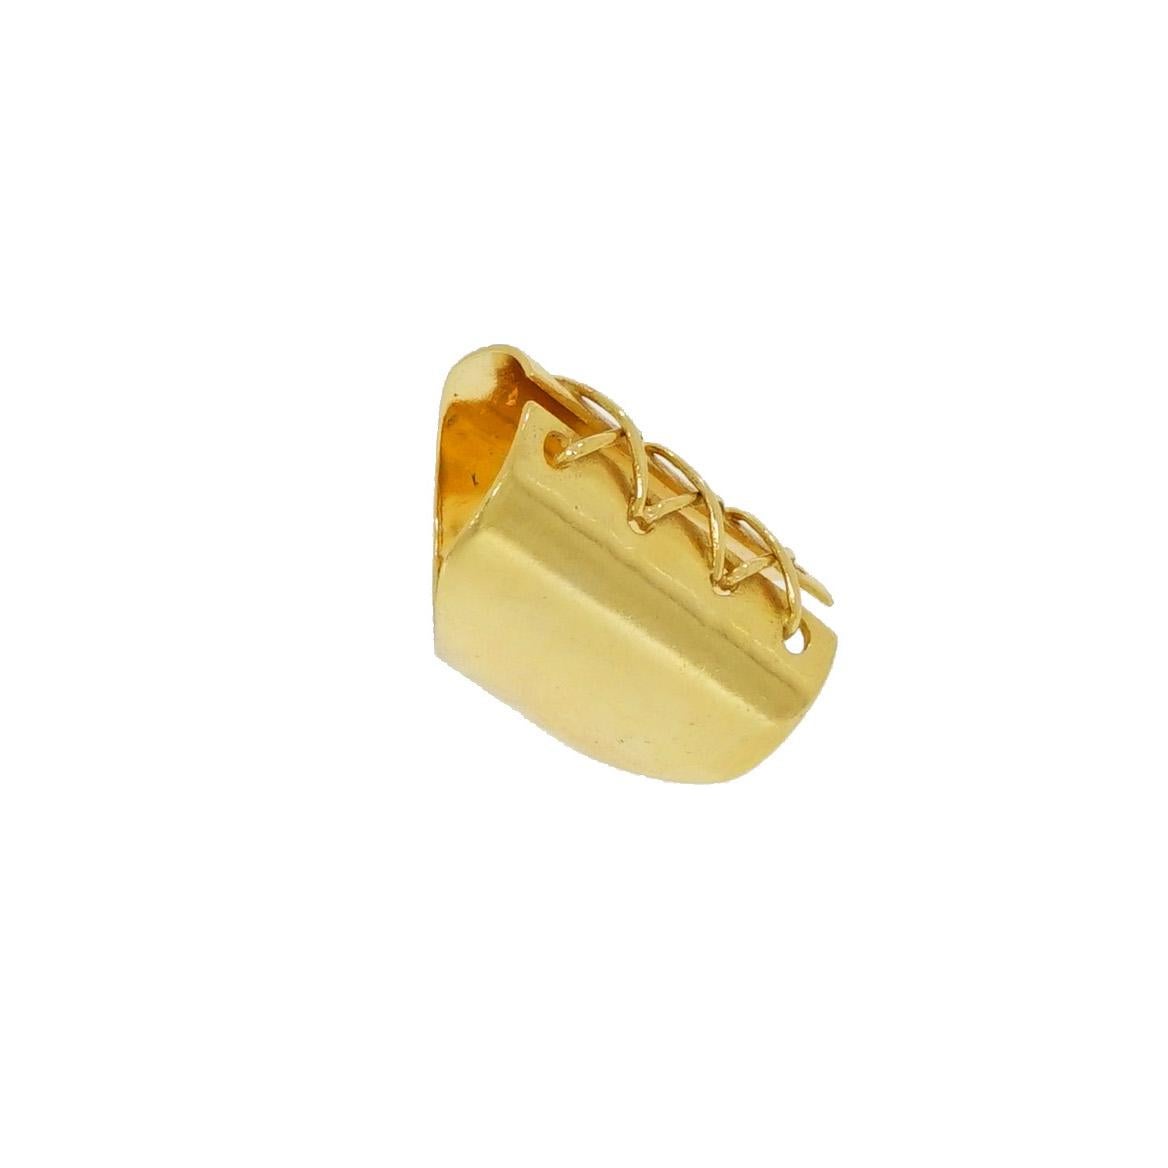 A design that speaks femininity and beauty, yet the simplicity of the details made this ring very unique. The corset design is crafted in 14k Yellow Gold and measures approximately 26.5mm wide.
Made to fit a finger size: 5